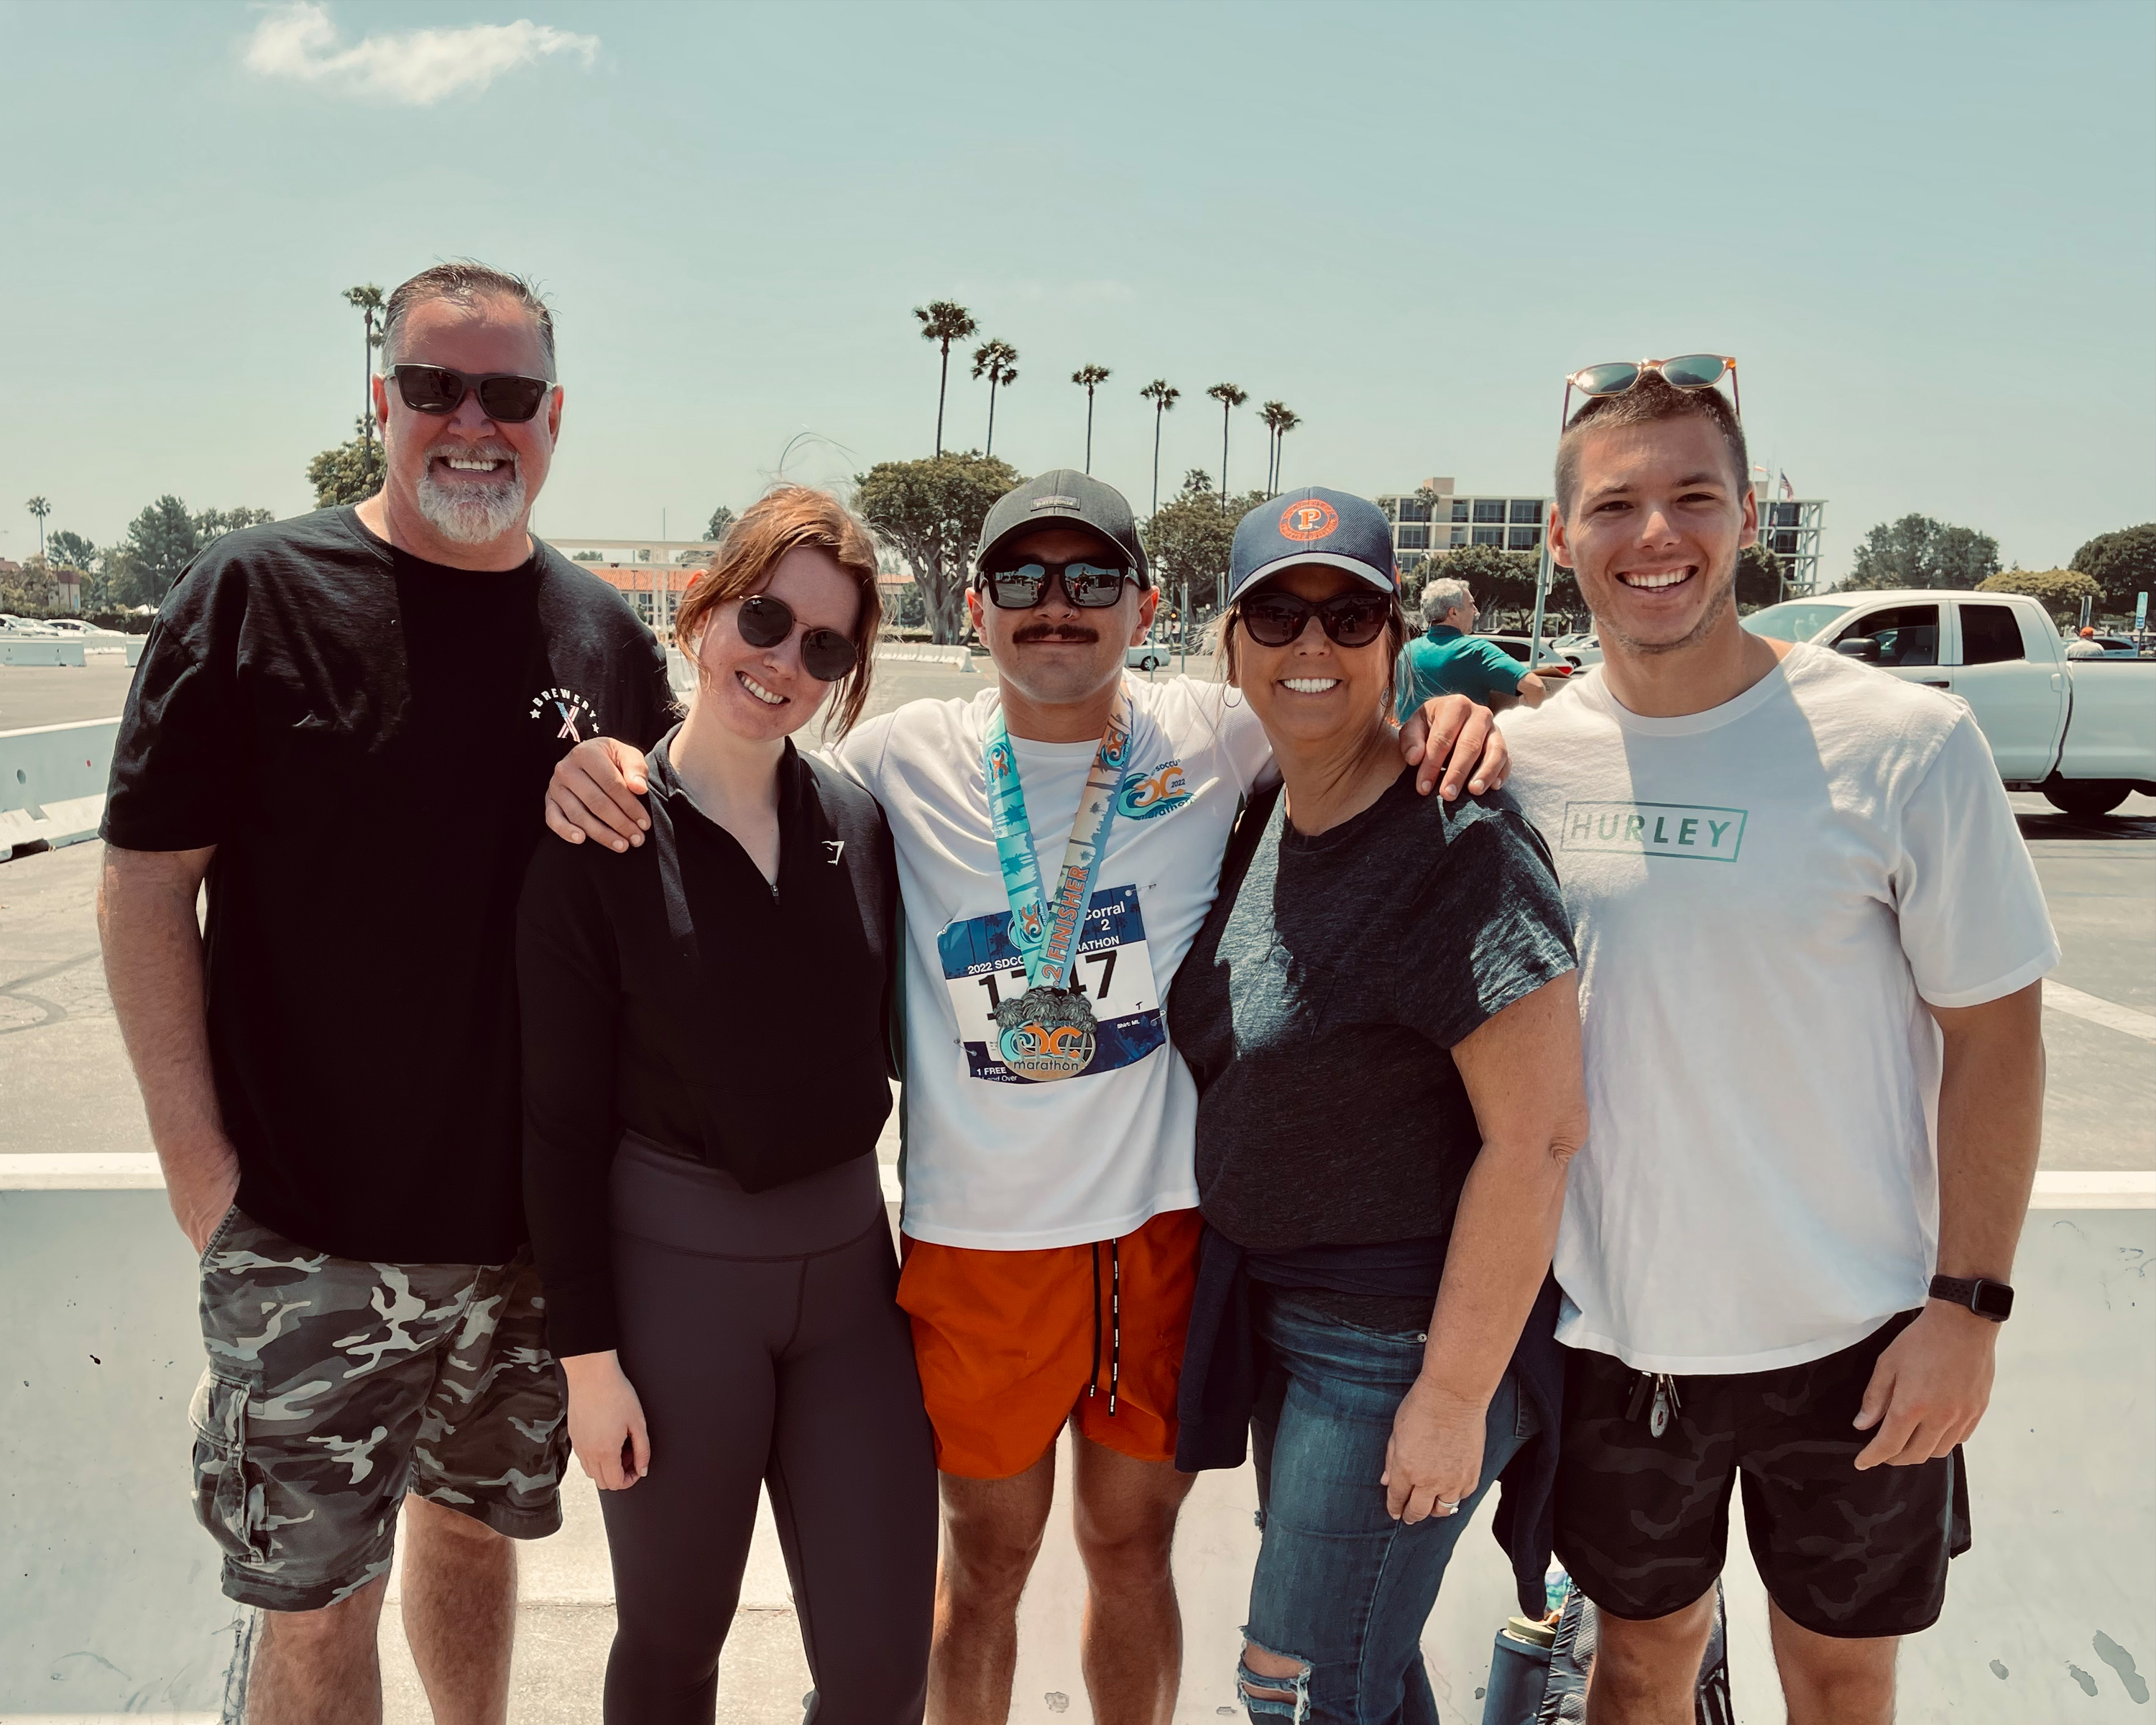 Five people stand in a parking lot, one holds a metal from completing a marathon